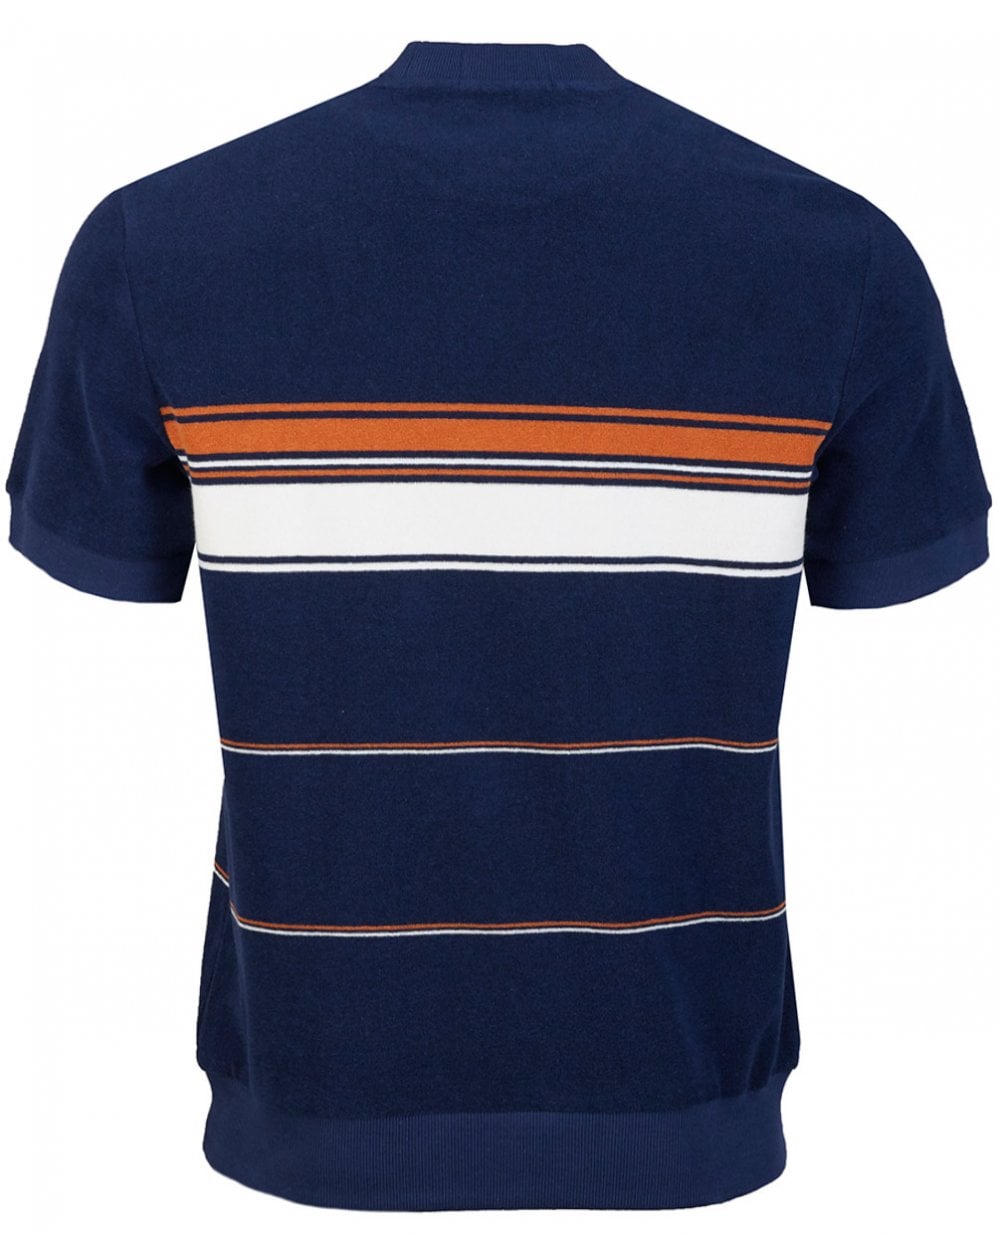 Fred Perry Re-Issues Striped Towelling T-Shirt - Proper Magazine